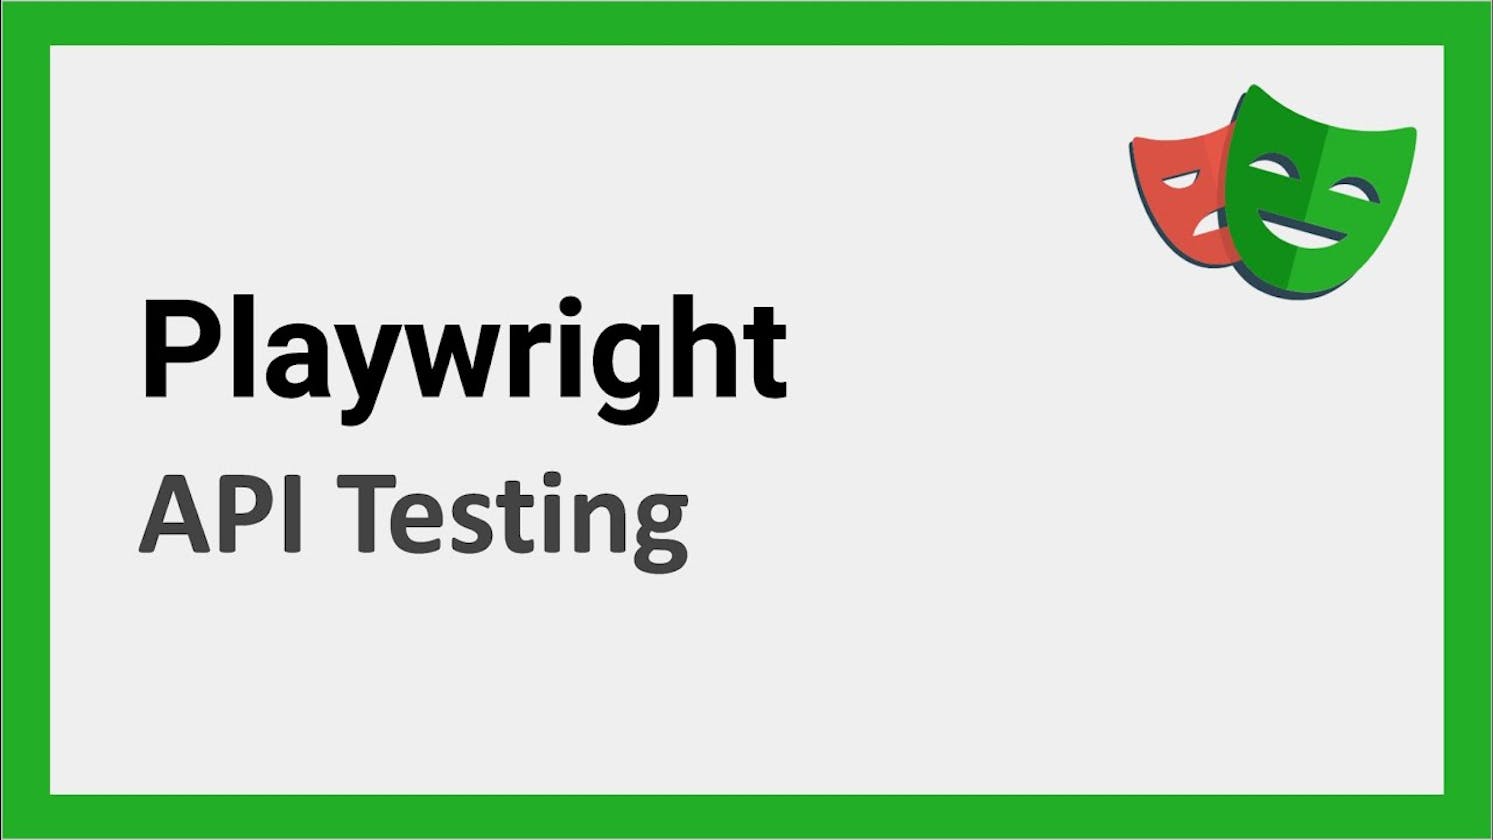 API Testing with Playwright: Handbook for beginners